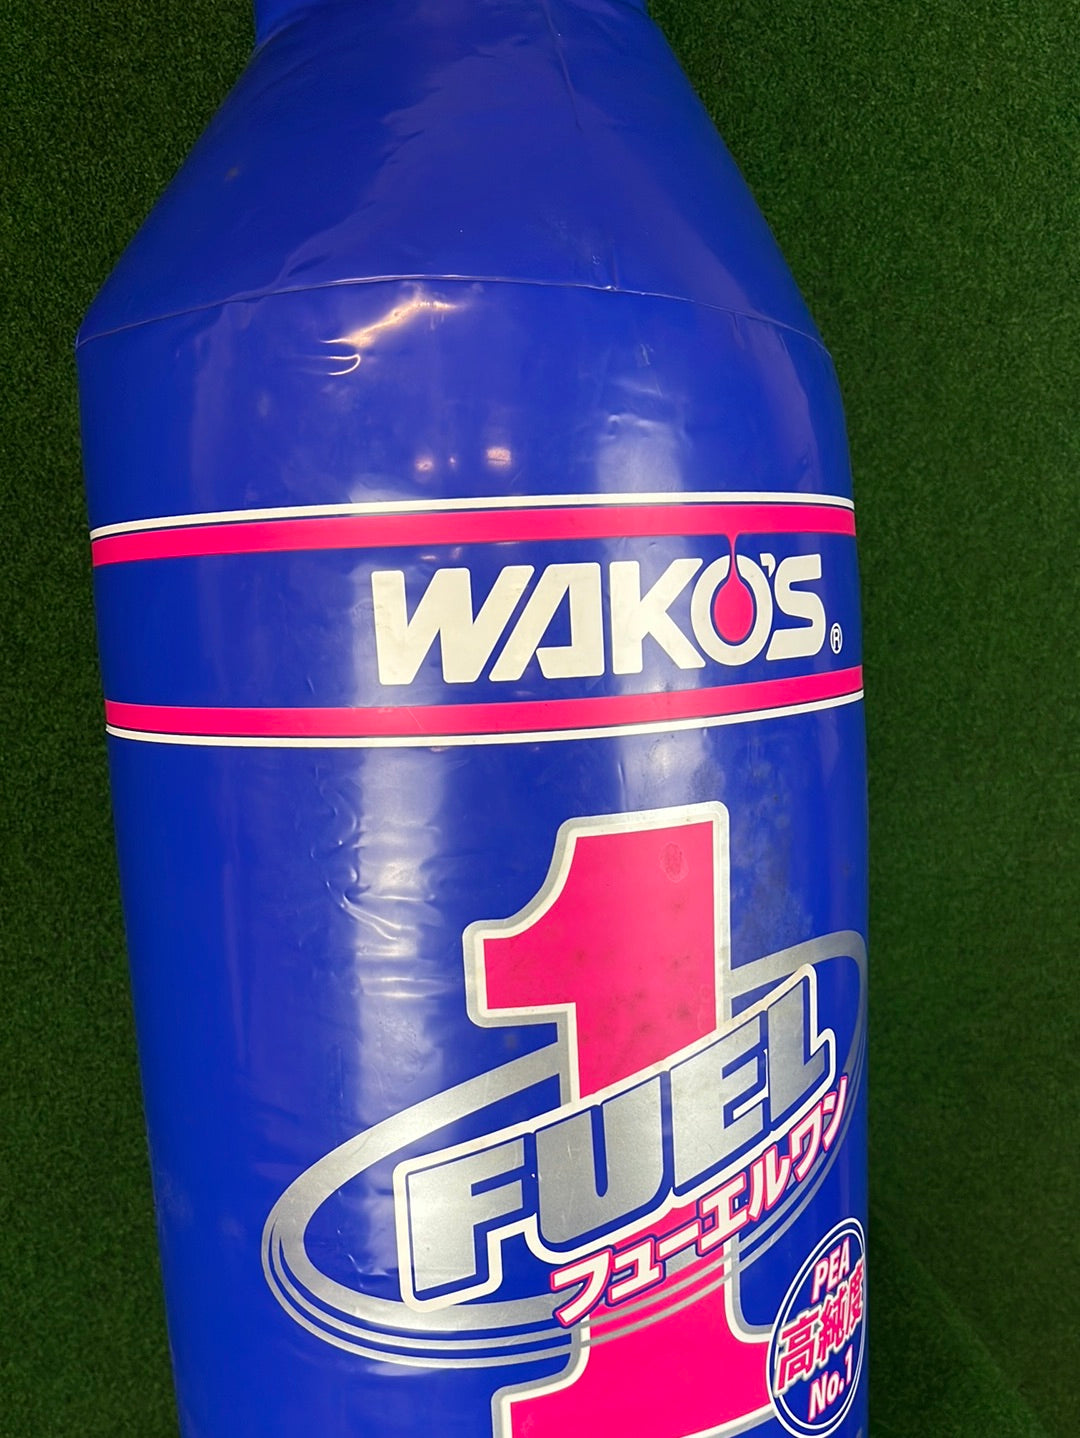 Wako’s - Fuel 1 Inflatable Japanese Retail Display Bottle